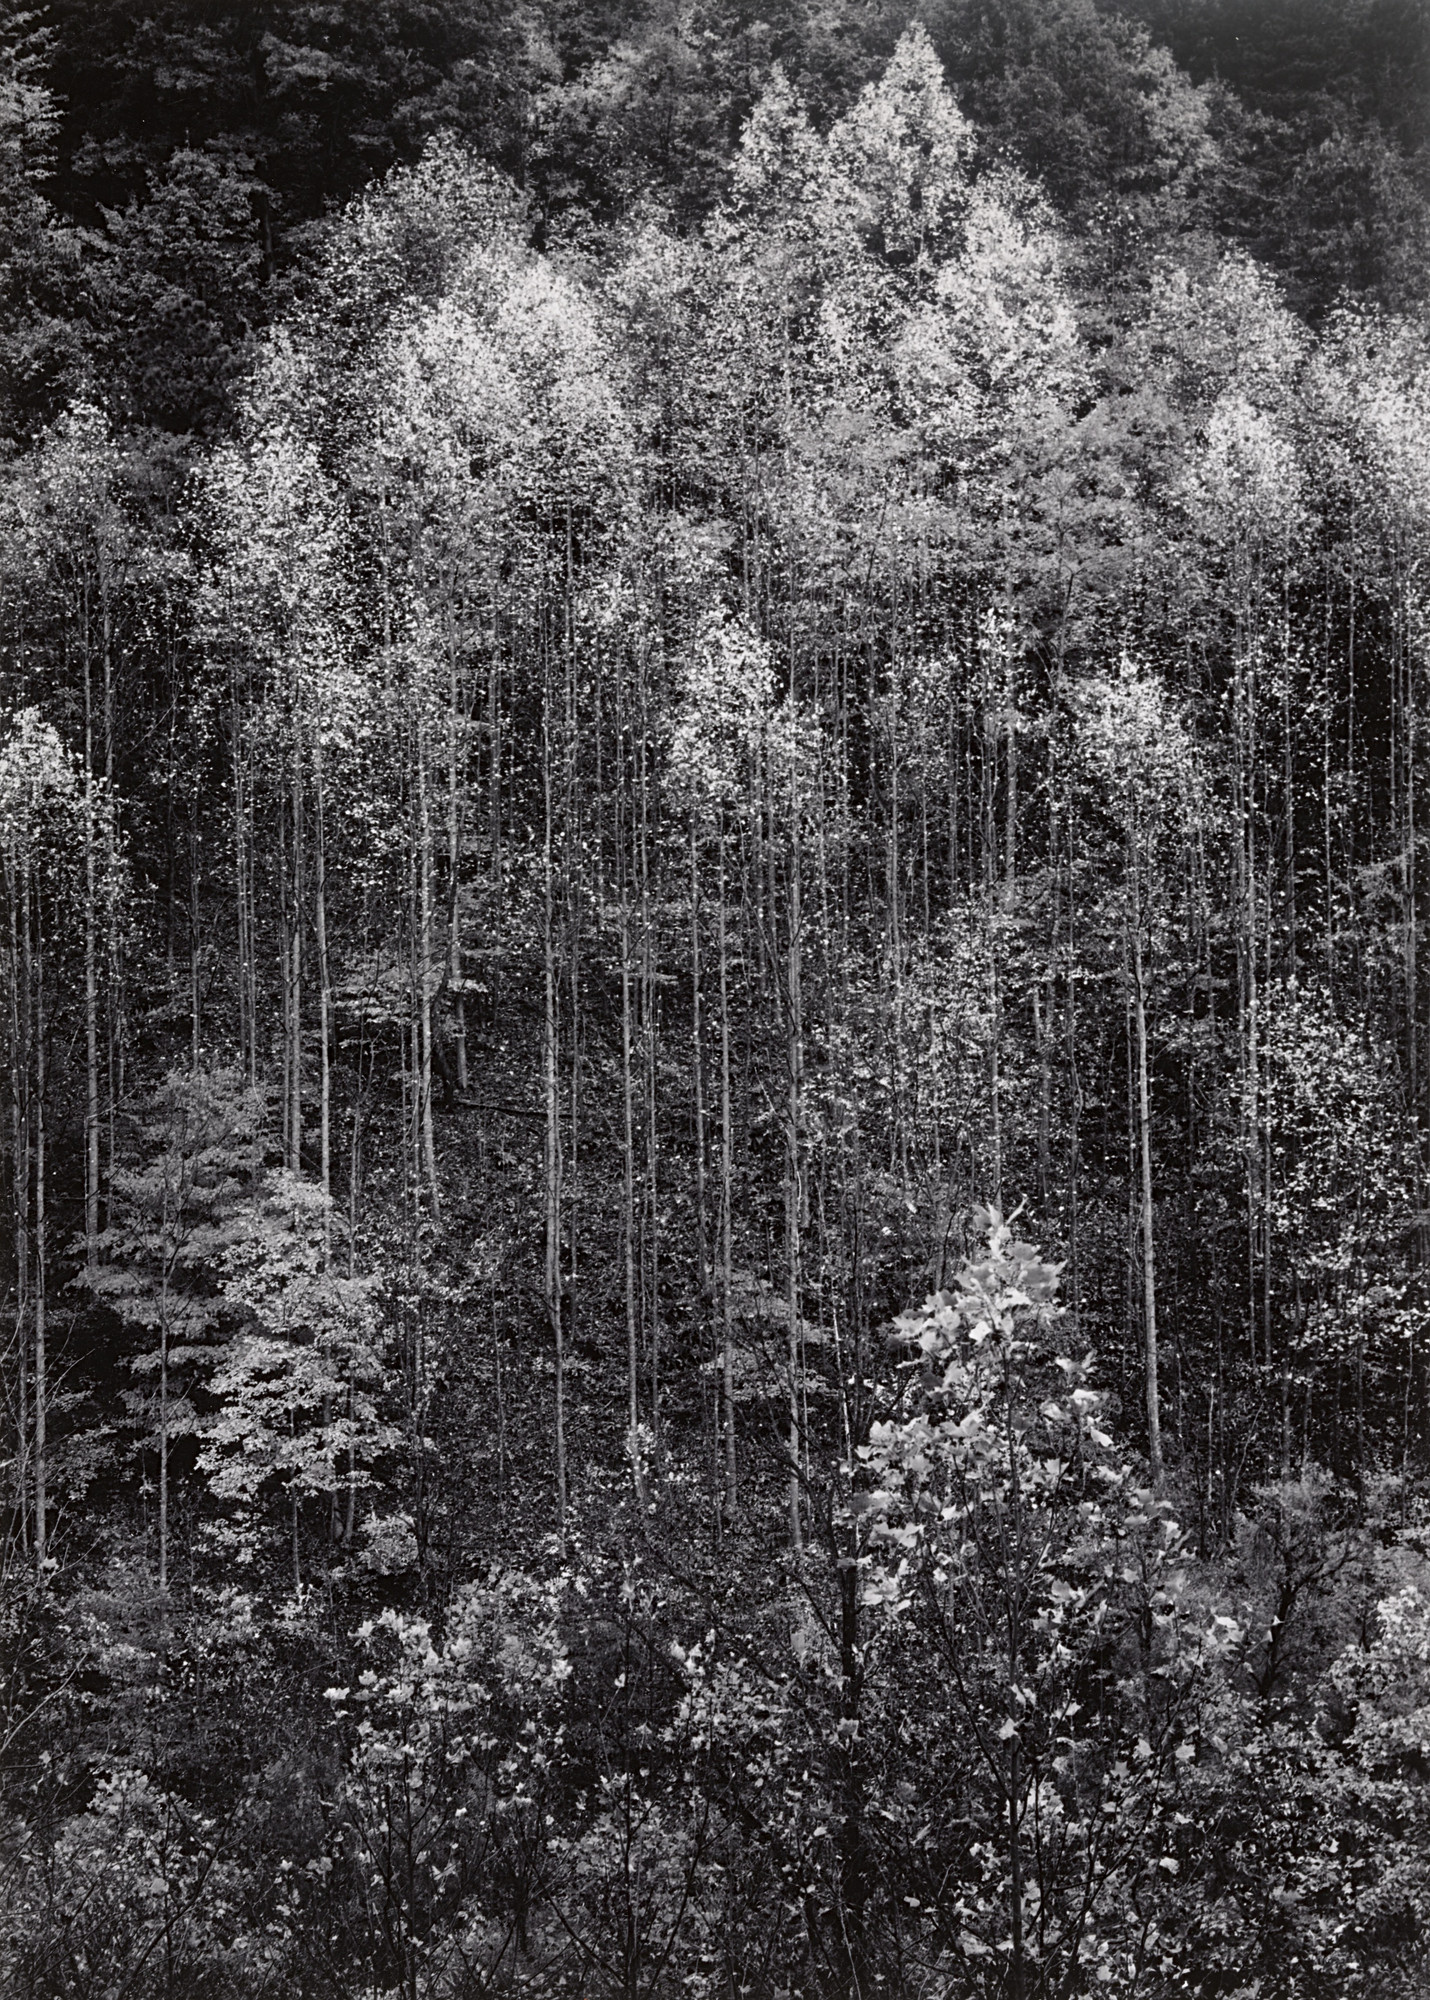 Ansel Adams, Great Smoky Mountains, Tennessee, Iconic photography, 1430x2000 HD Handy